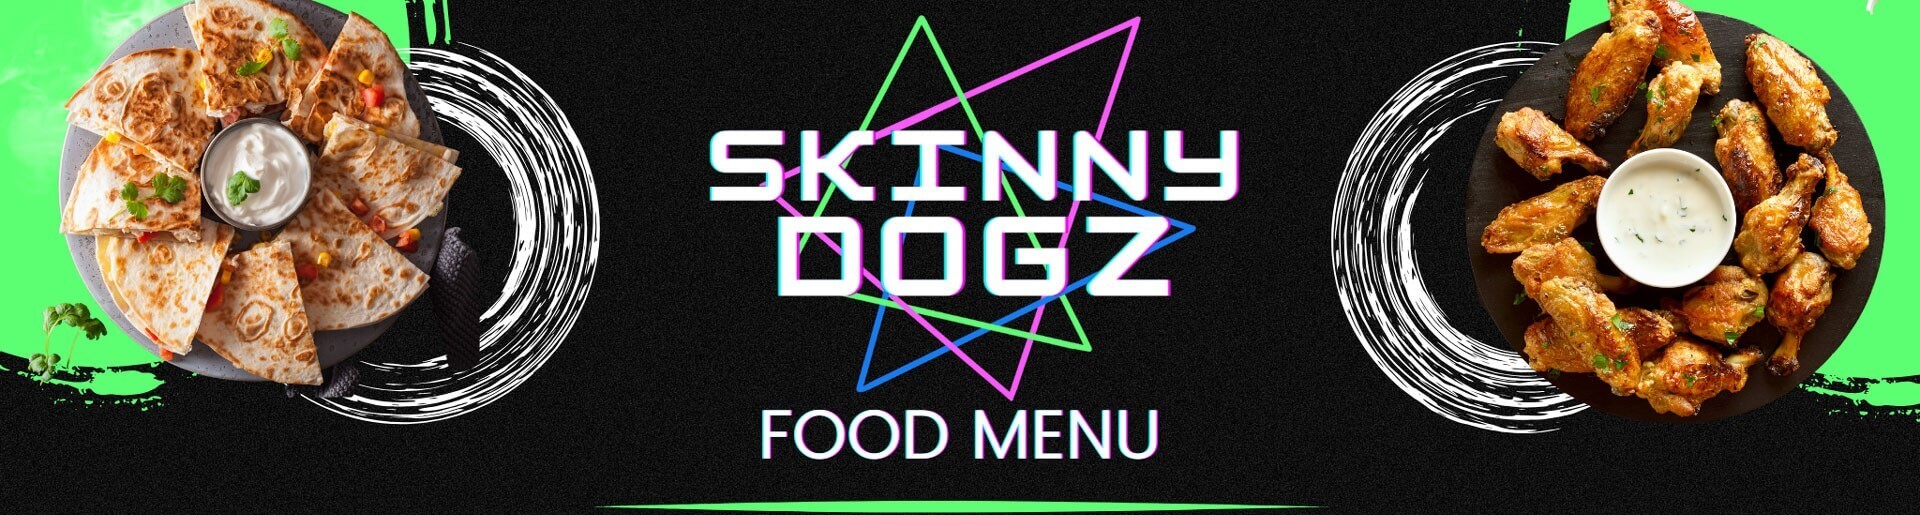  Menu for skinny dogs featuring a variety of nutritious food options.